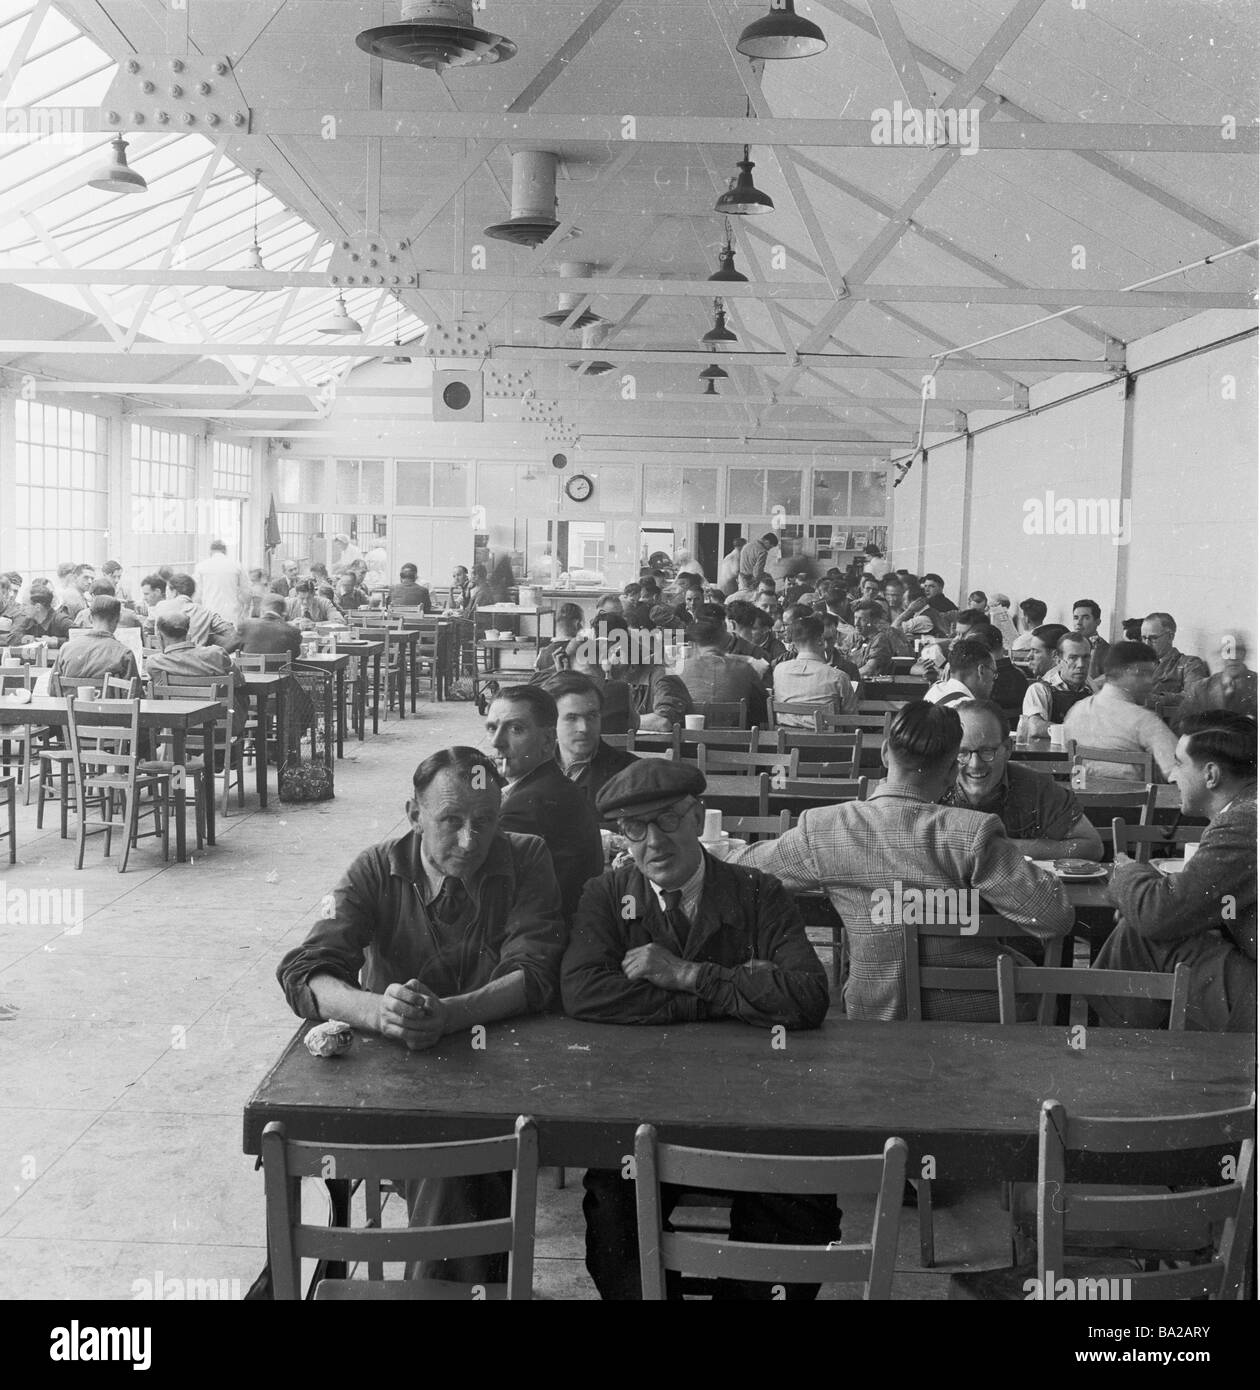 1950s Historical Industrial Workers Sitting Together At Tables In BA2ARY 